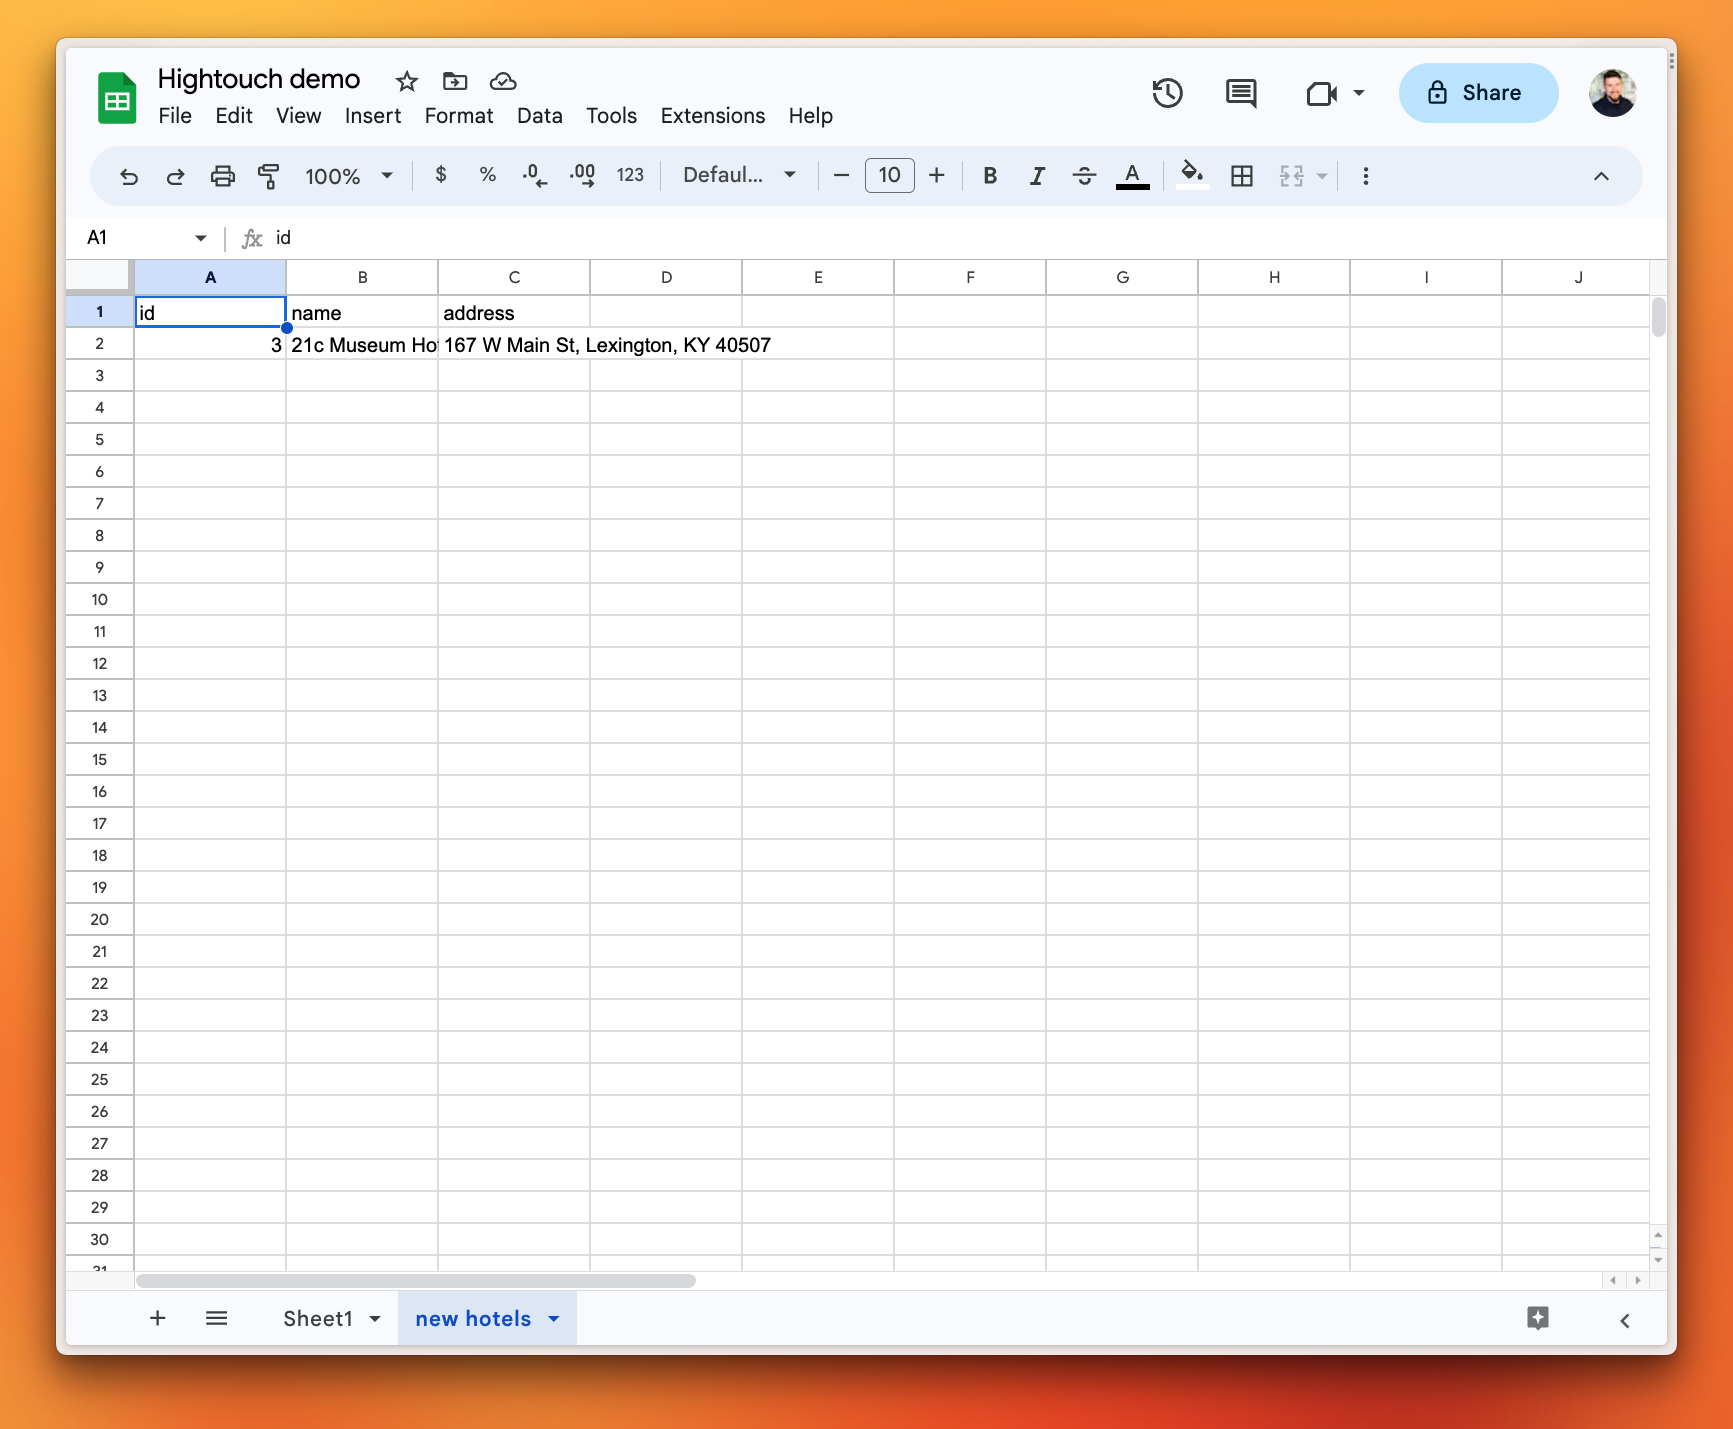 The new hotels sheet in Google Sheets